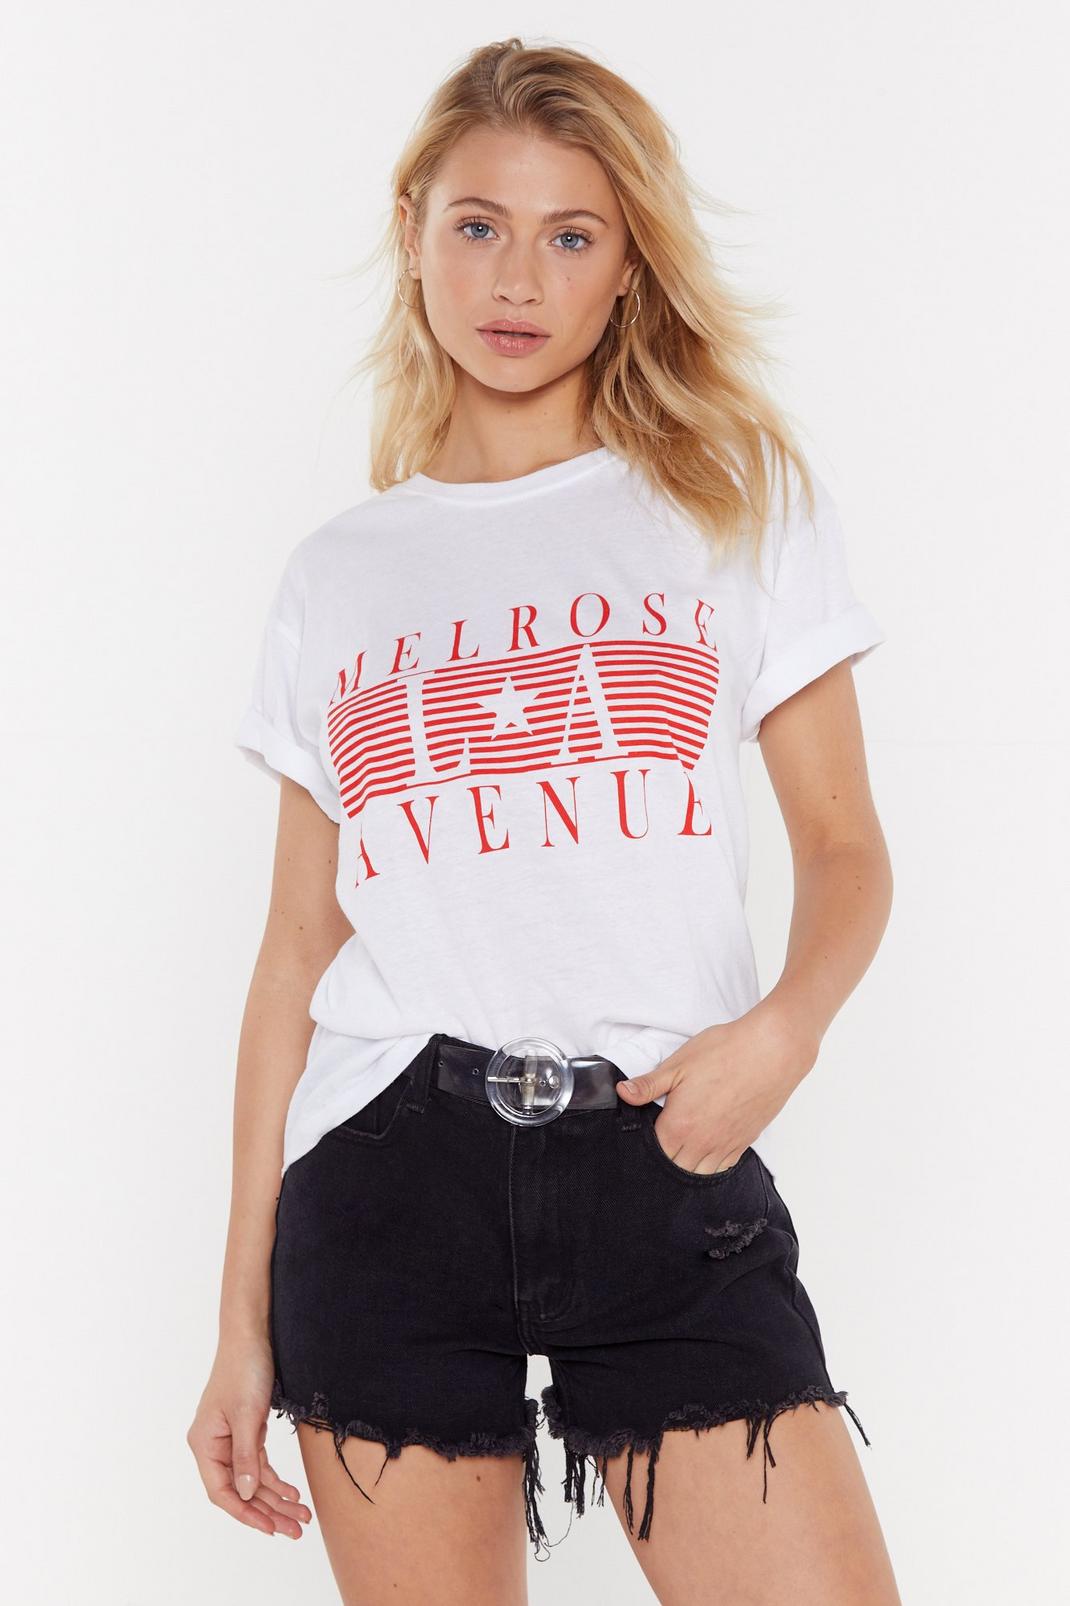 Melrose Avenue Graphic Tee image number 1